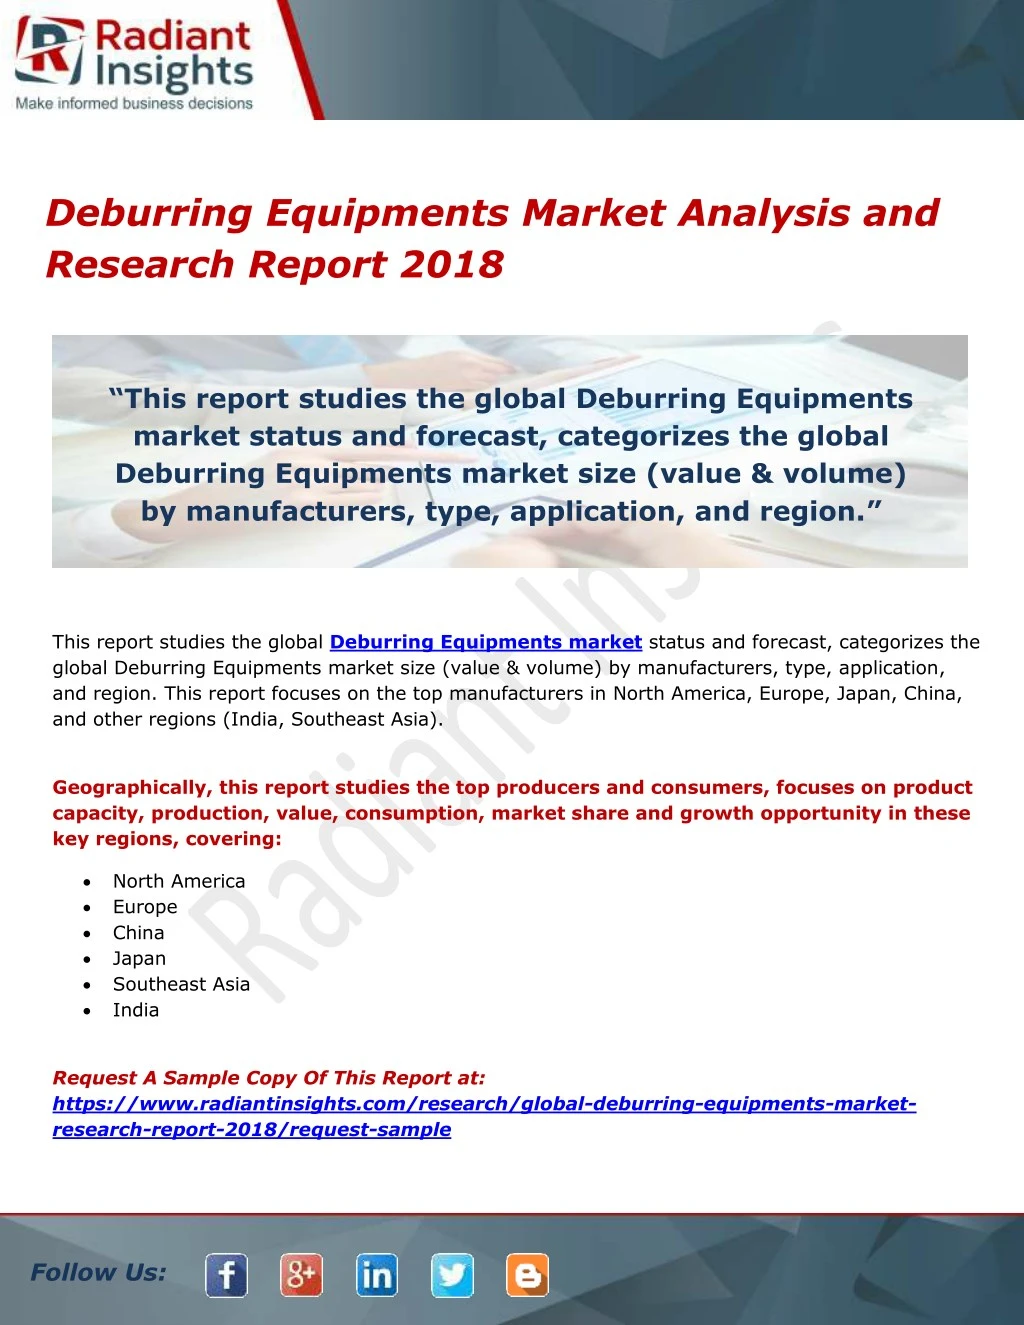 deburring equipments market analysis and research